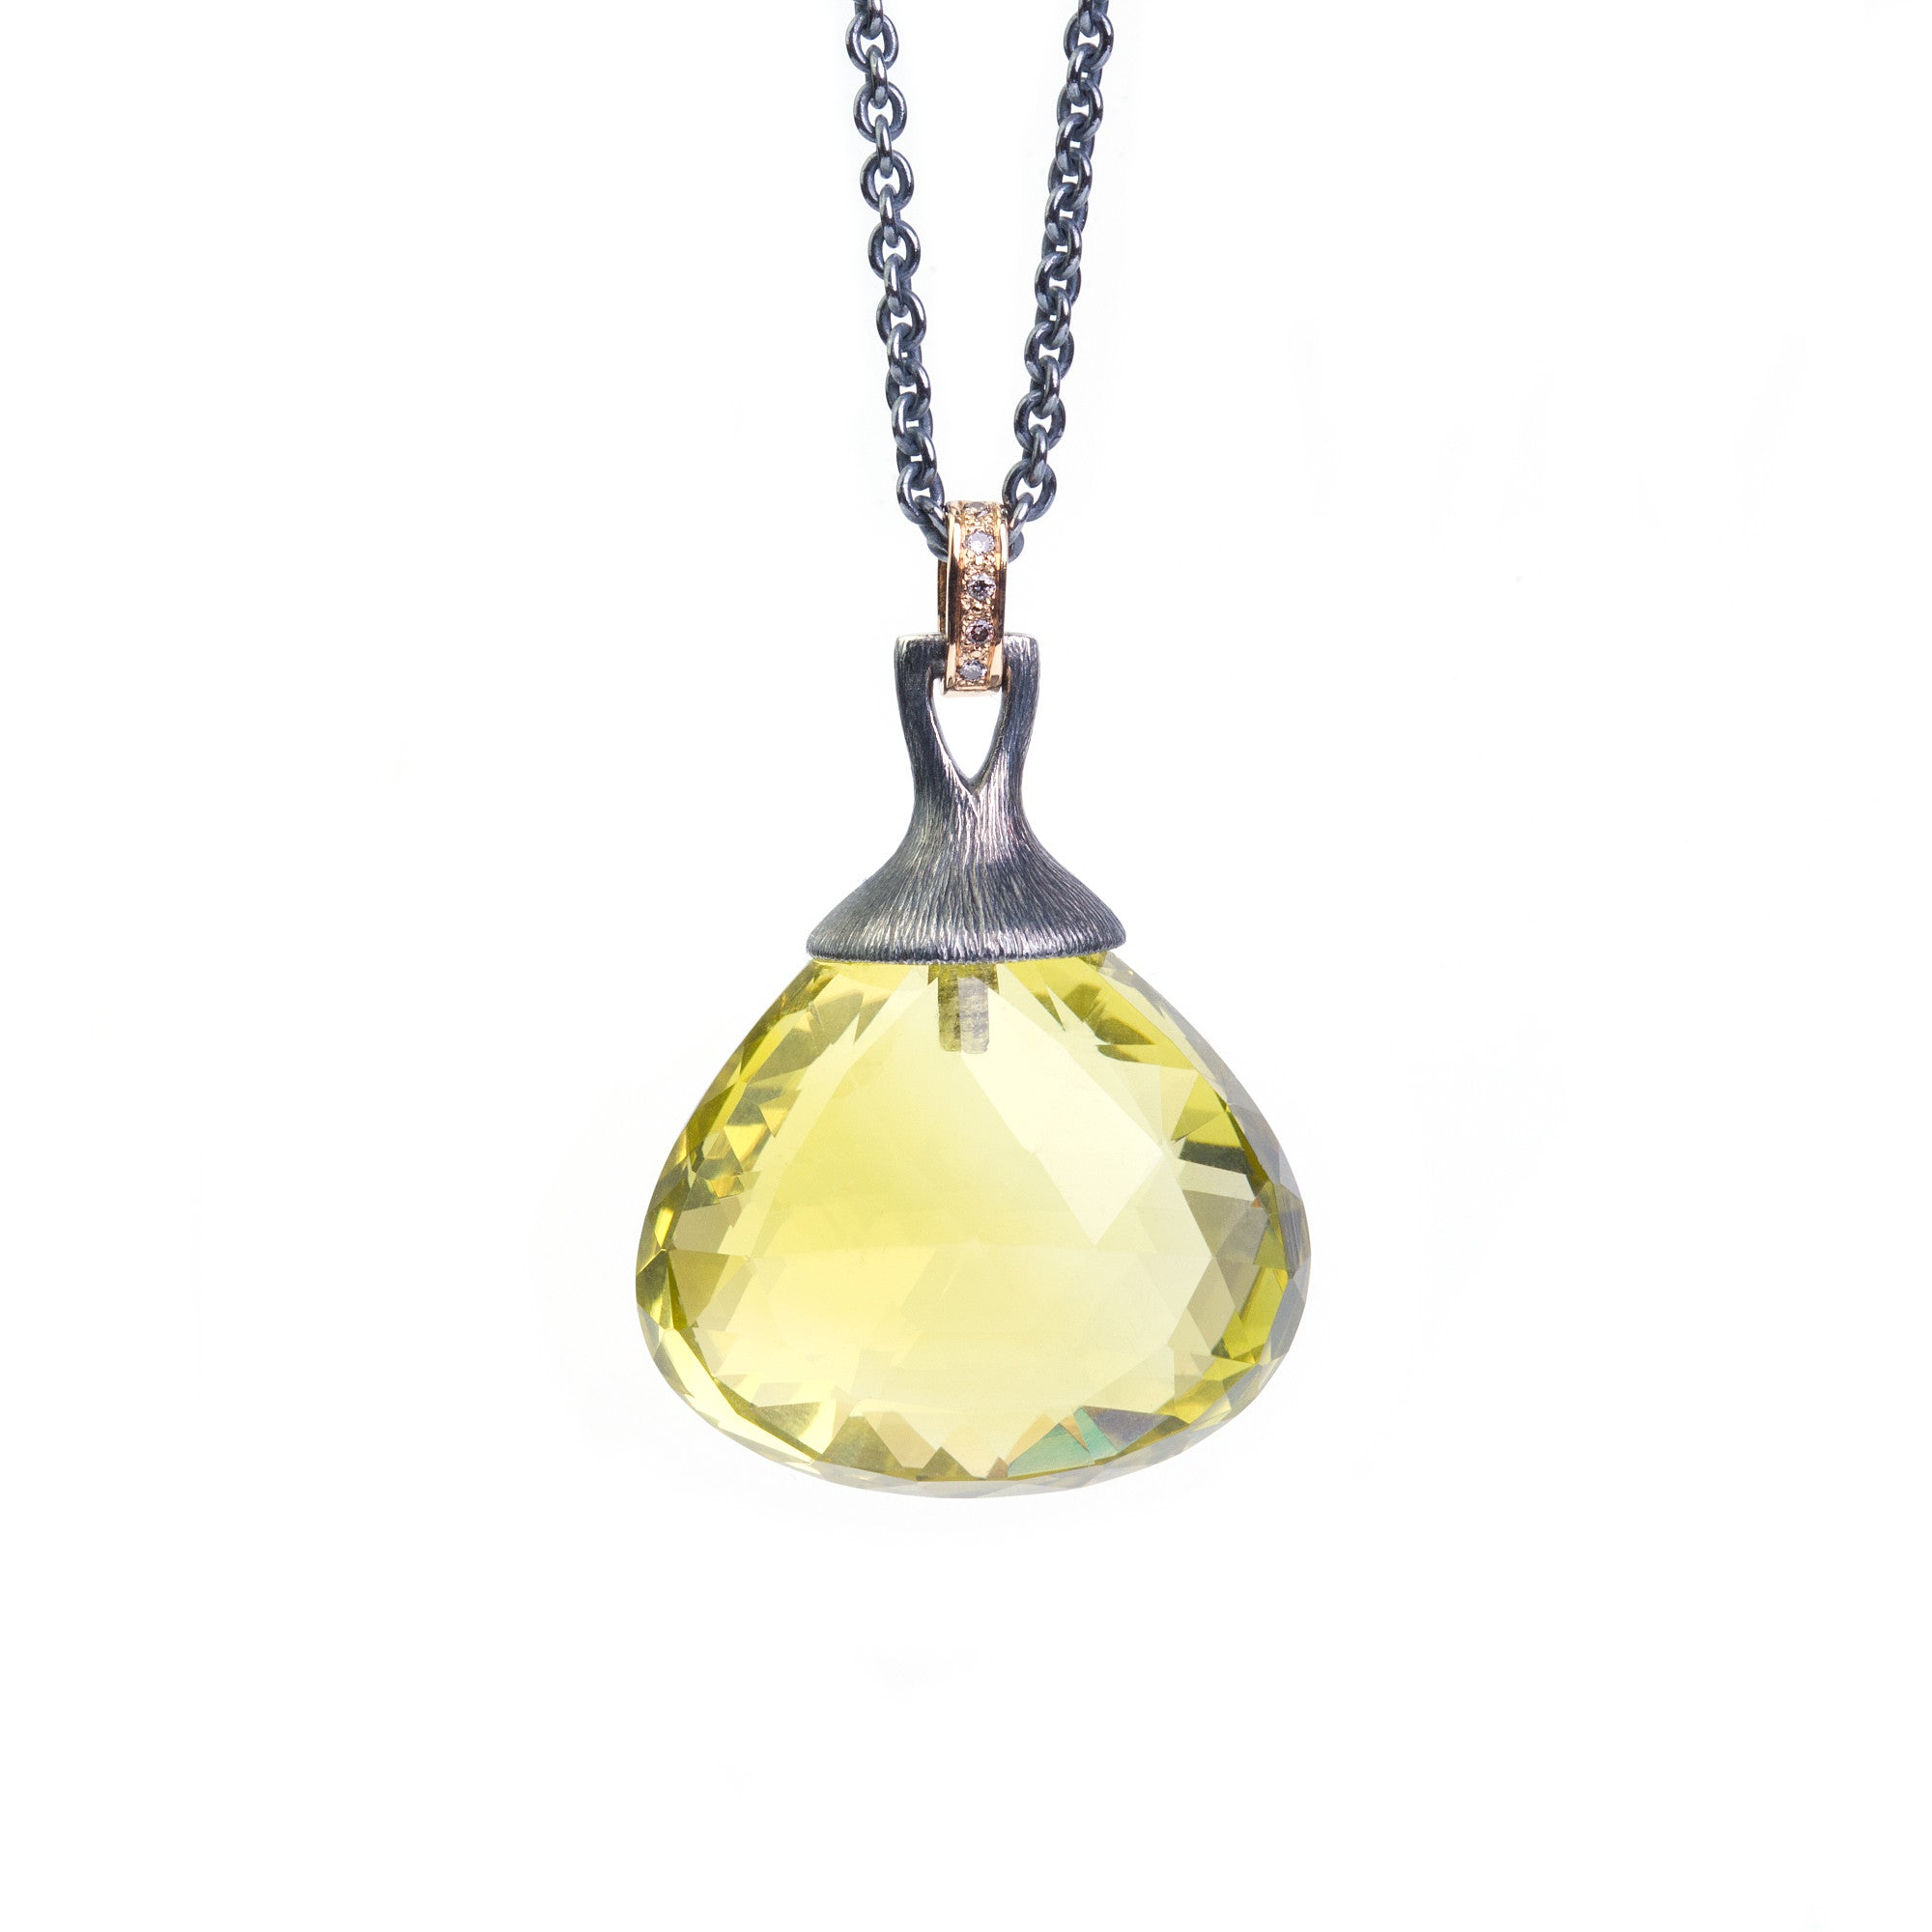 Oro verde Quartz with brown diamonds necklace, crafted in 18K gold and sterling silver. Ewa Z. Sleziona Jewellery